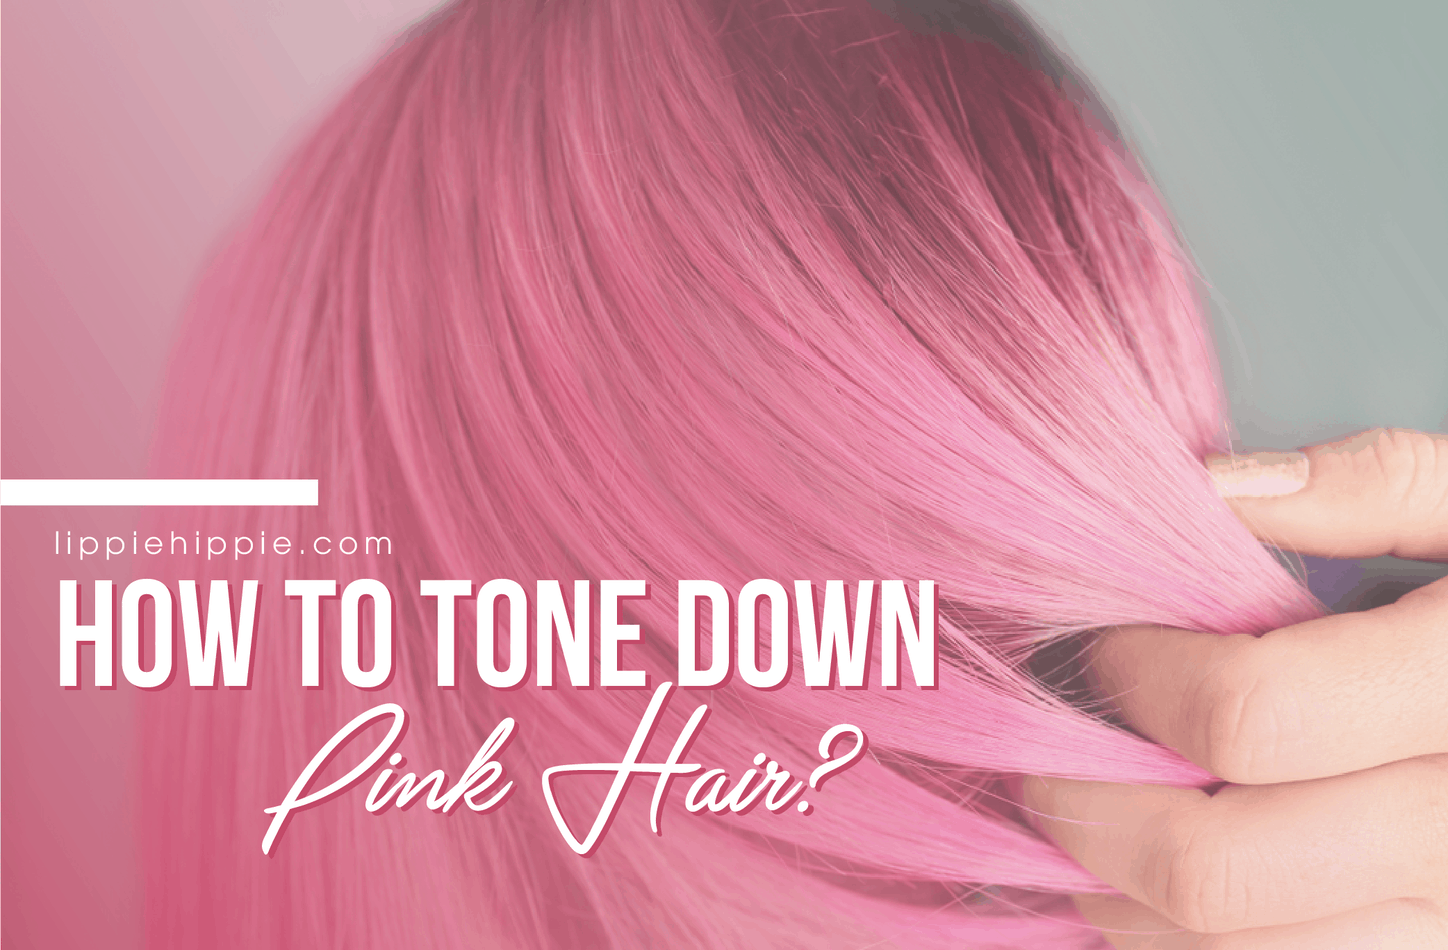 Pink Tones. Wamr and cool Tone Pink. Tone down